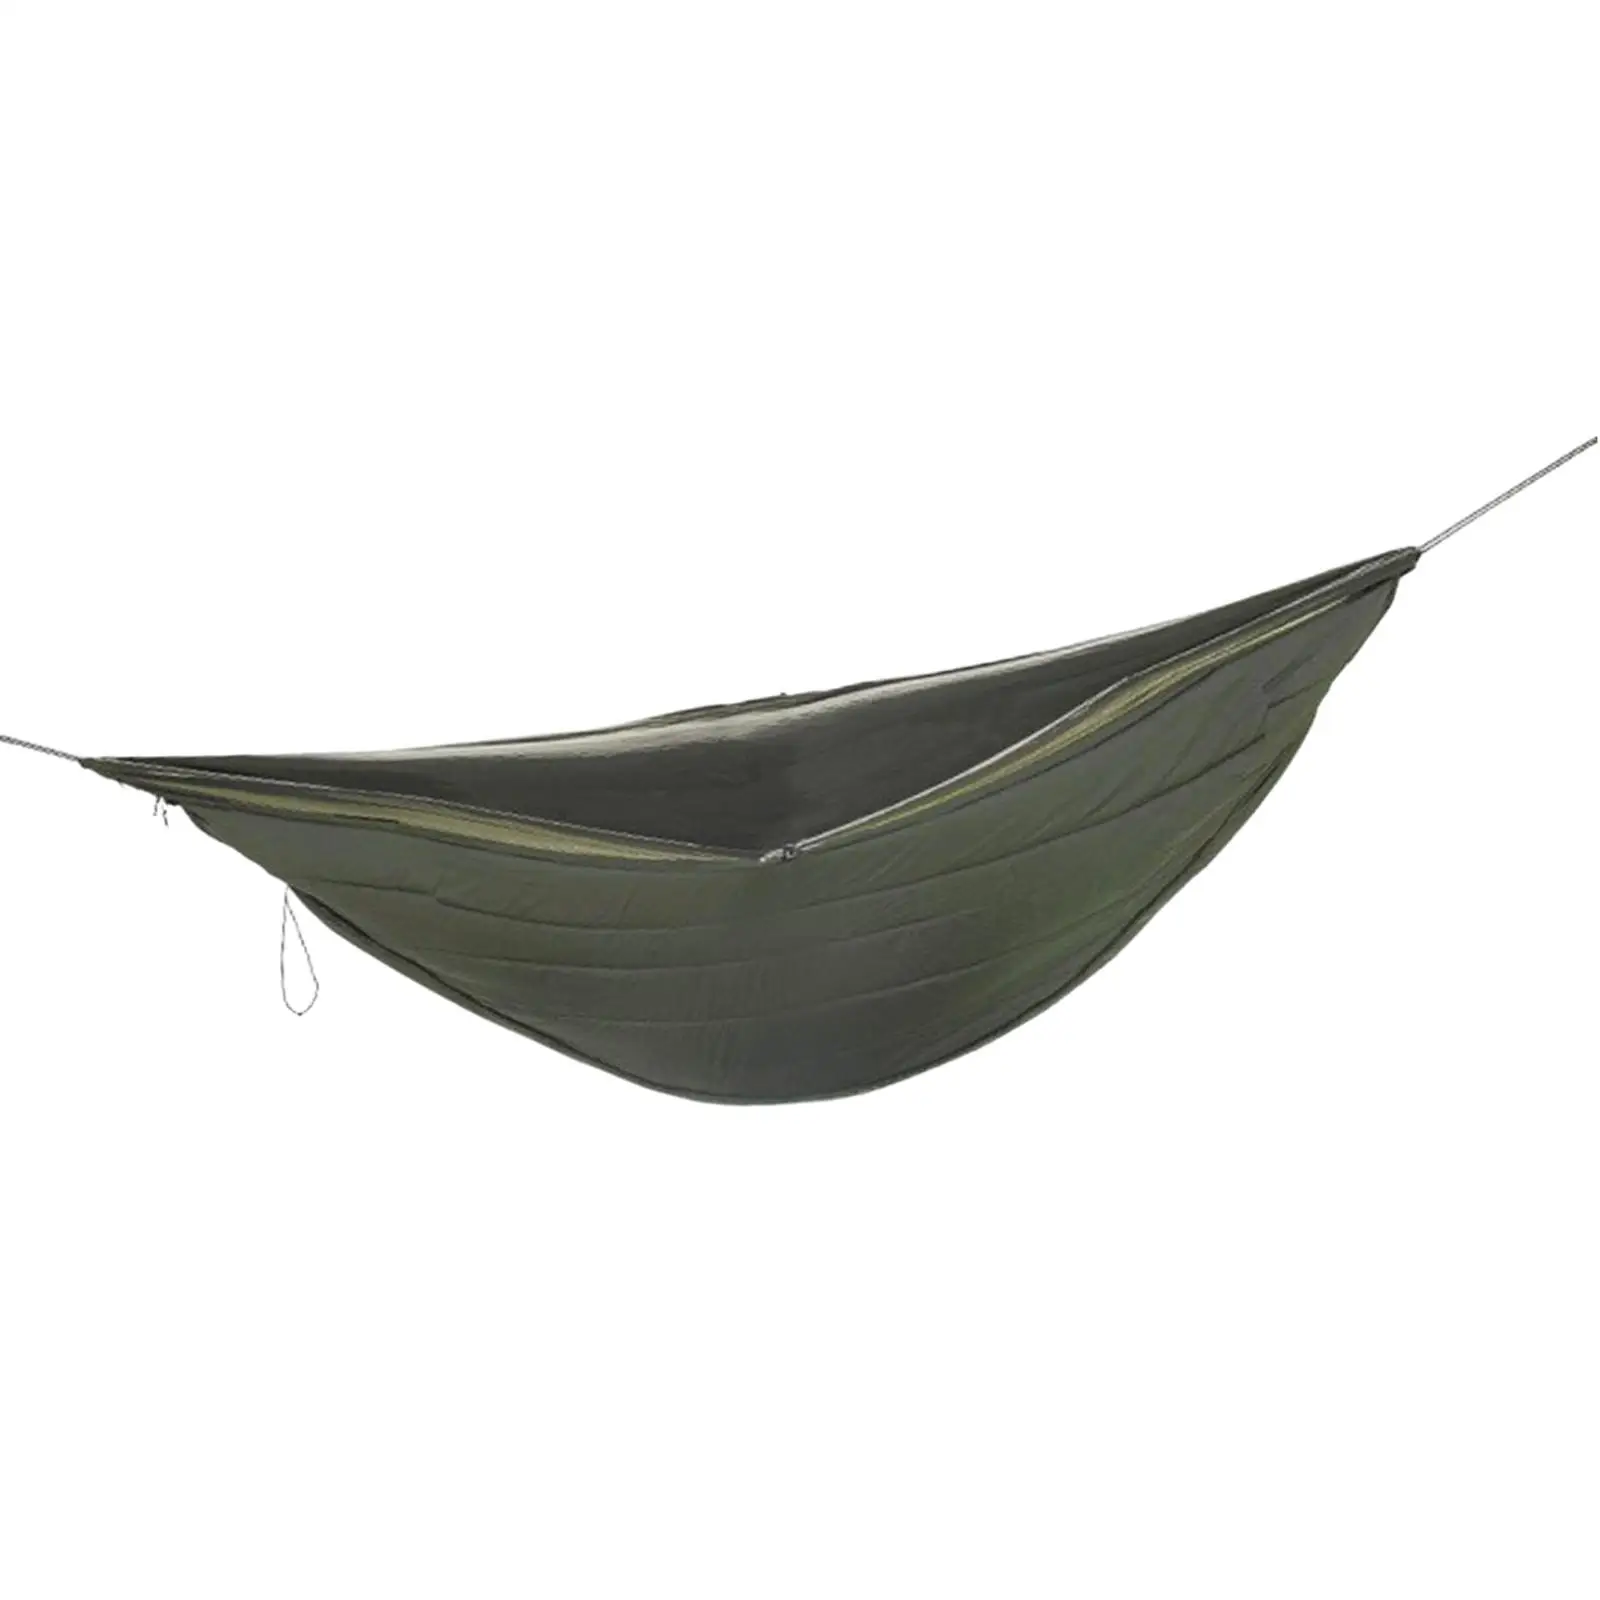 Hammock Underquilt Large Under Blanket Lightweight Full Length Camping Sleeping Hammock for Fishing Backpacking Outdoor Beach